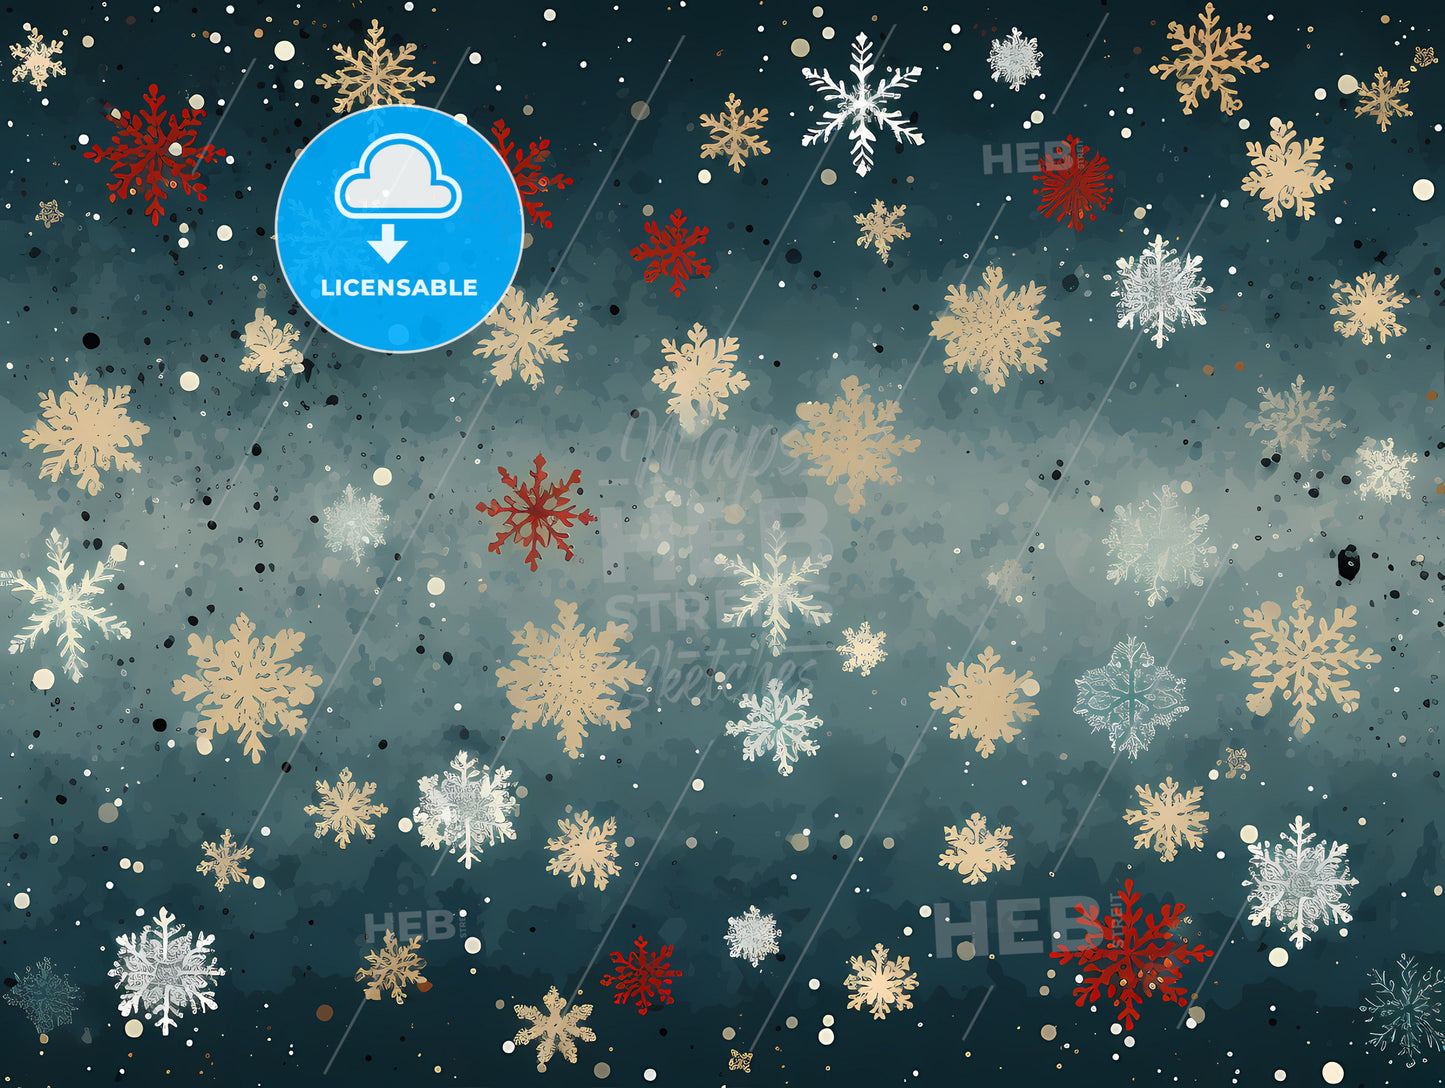 Christmas Greetings - A Group Of Snowflakes On A Dark Background